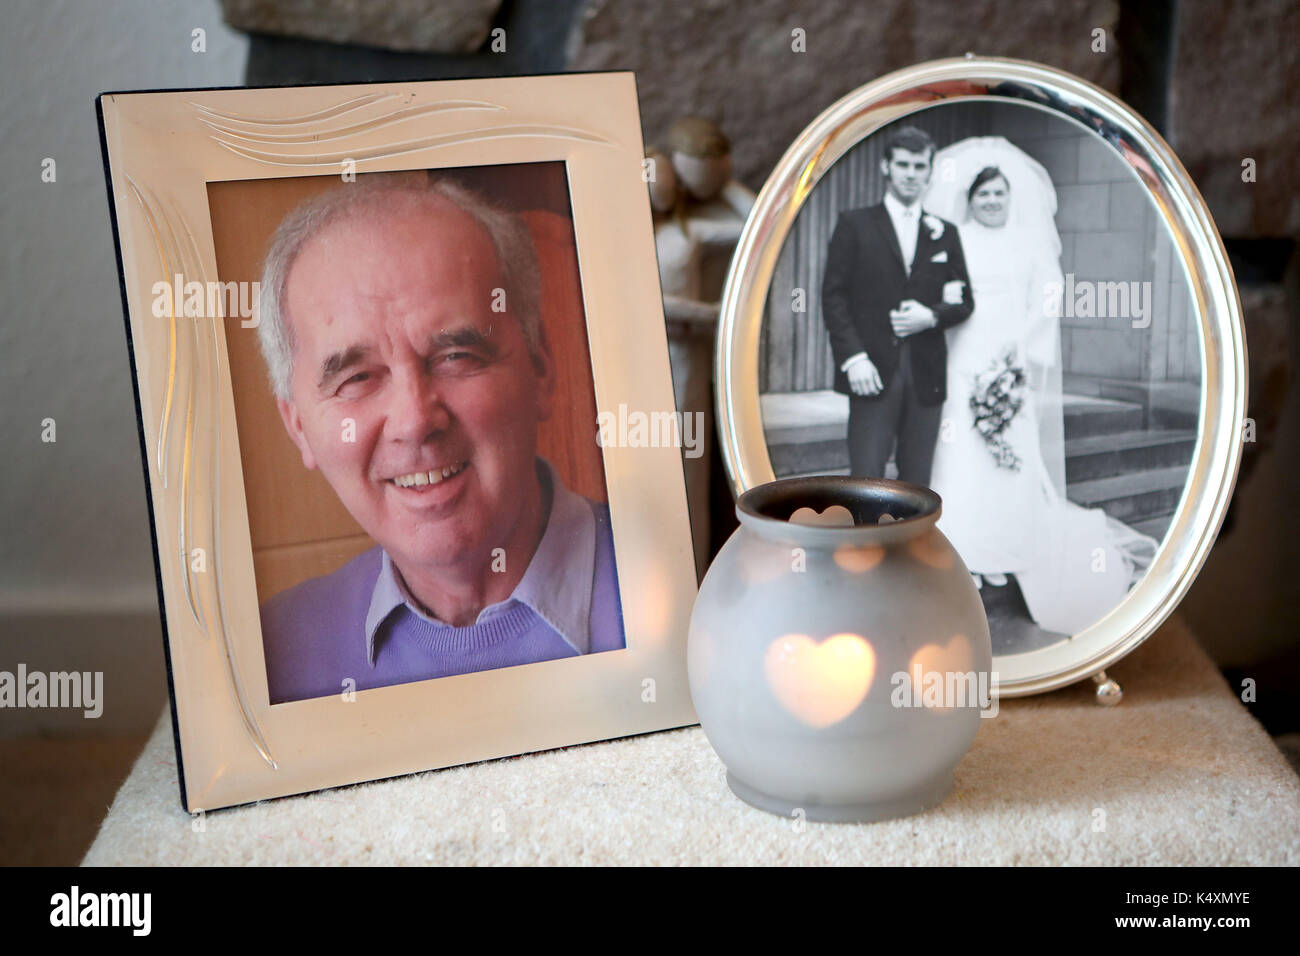 A wedding photograph of Amanda and Frank Kopel on their wedding day on 7 May 1969 and a portrait of the late Frank Kopel, taken in 2012, at their home in Kirriemuir, Angus, after Mrs Kopel successfully campaign for Frank's Law. Stock Photo